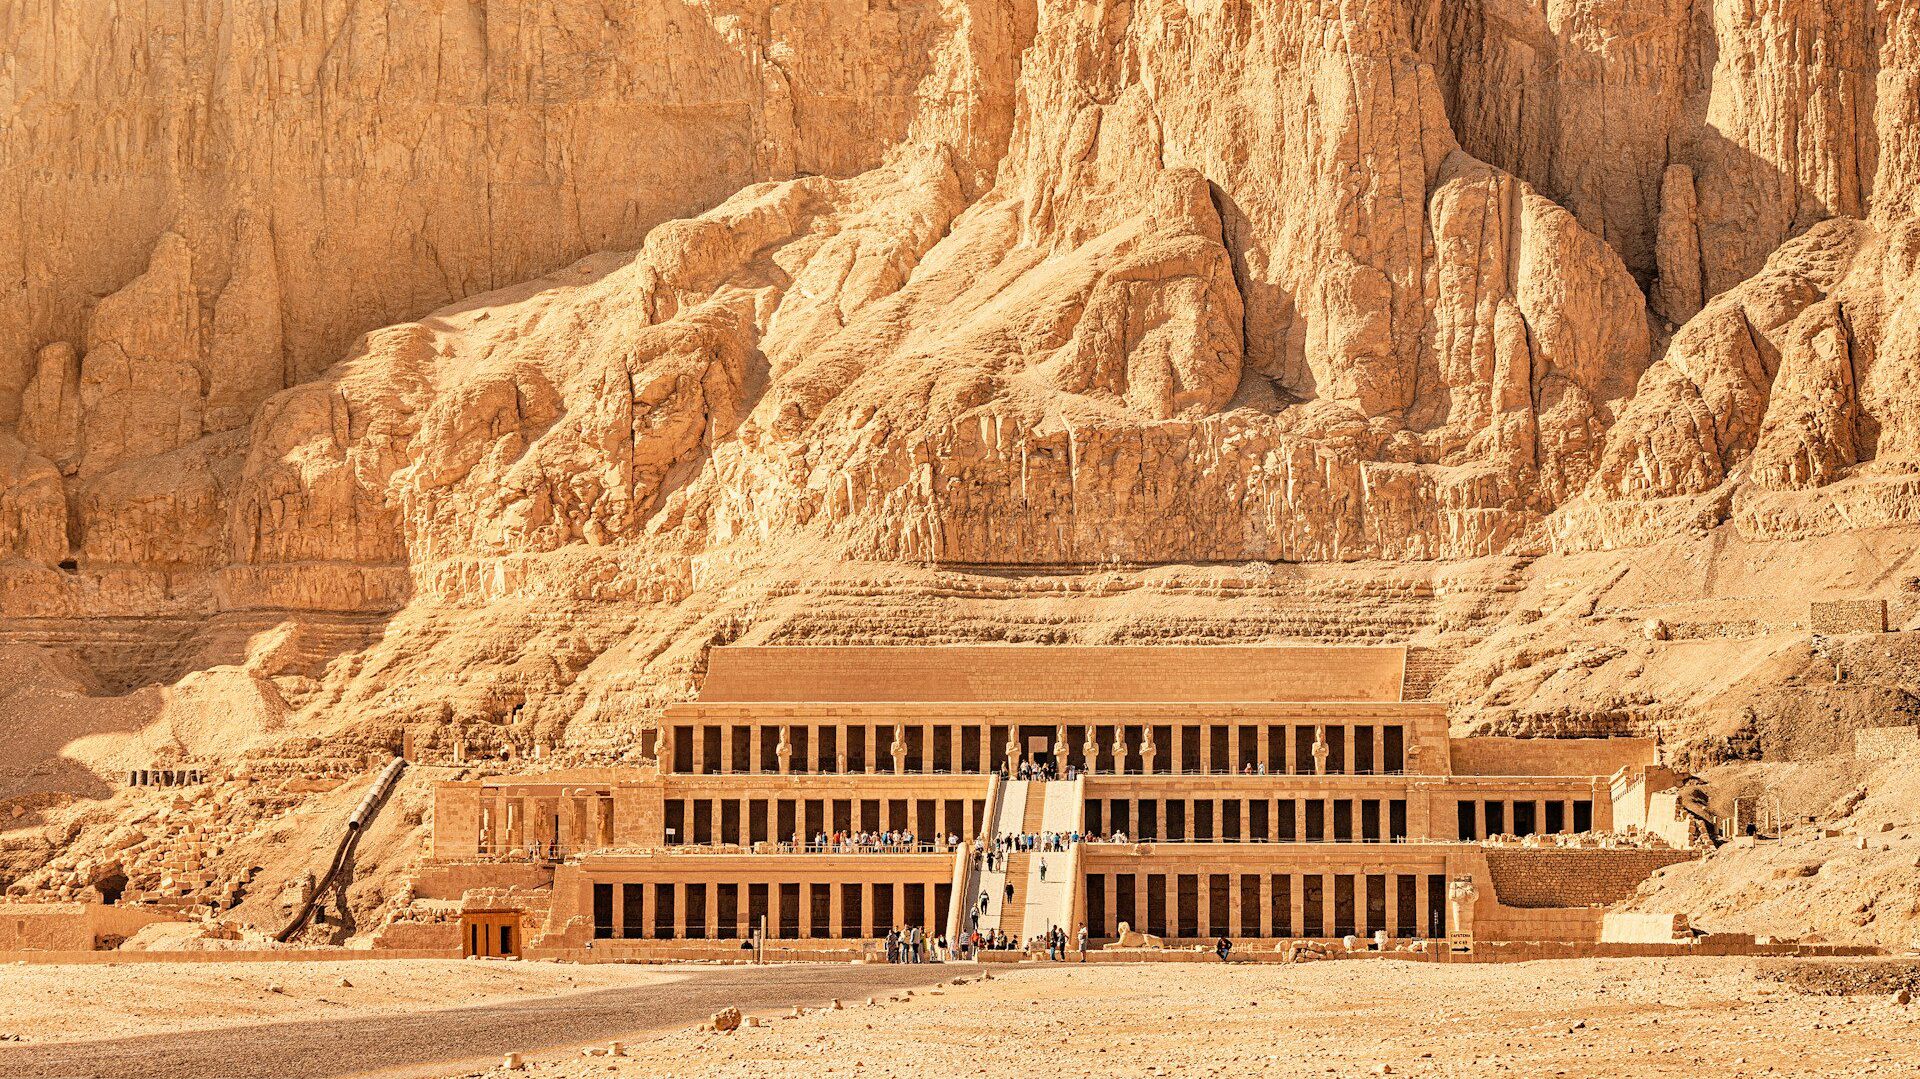 Photo of Hapshetphut's mortuary temple in Thebes Egypt